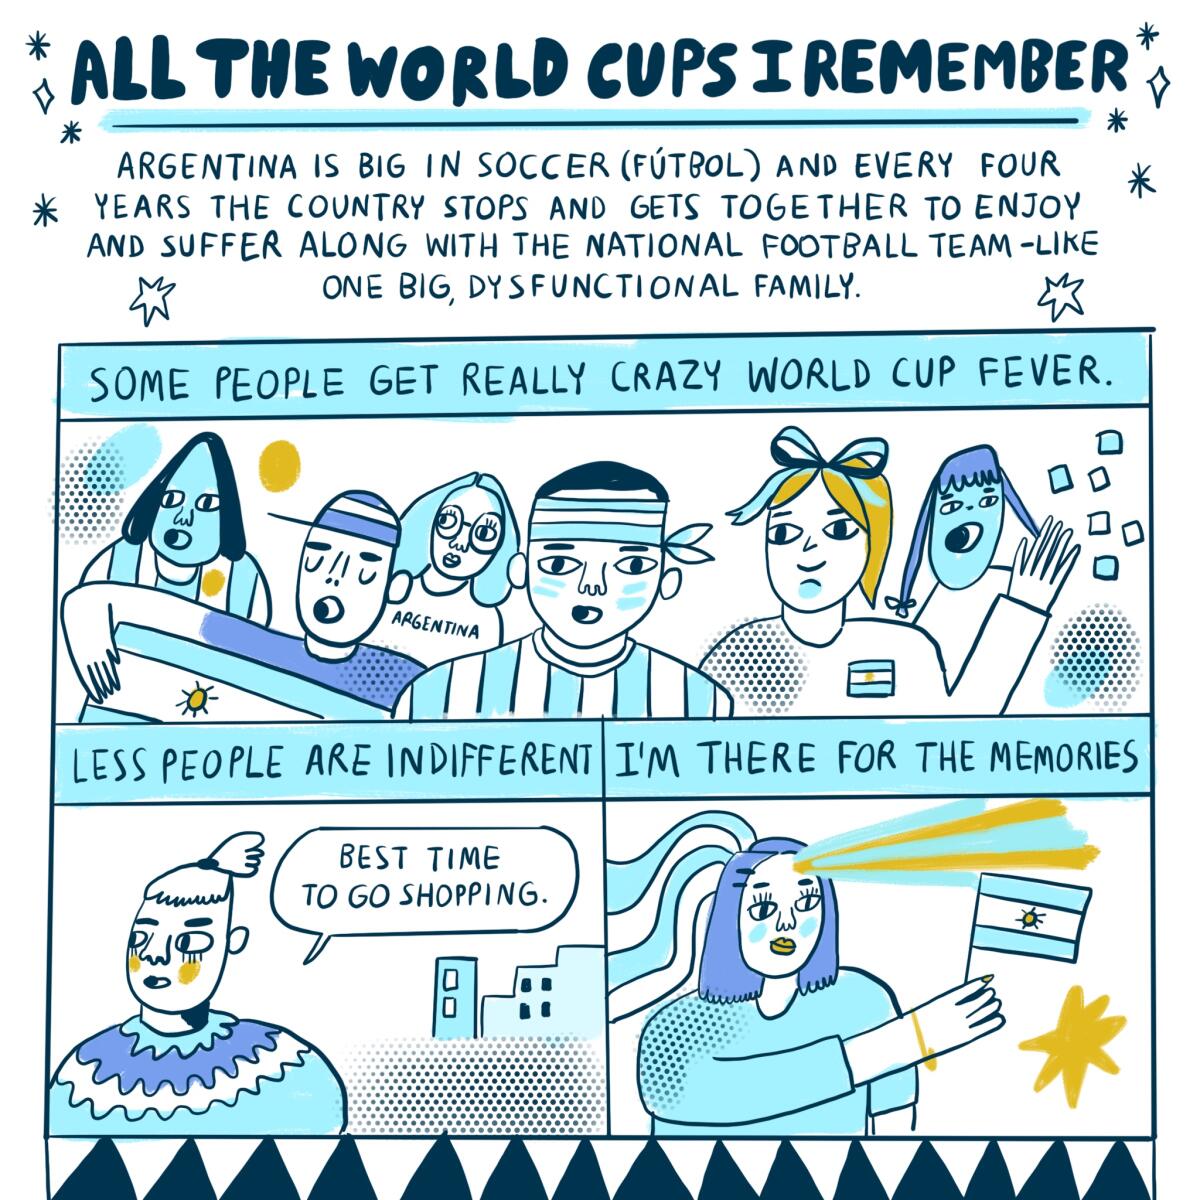 Argentina is big in Futbol and every four years the country gets together to enjoy and suffer. 